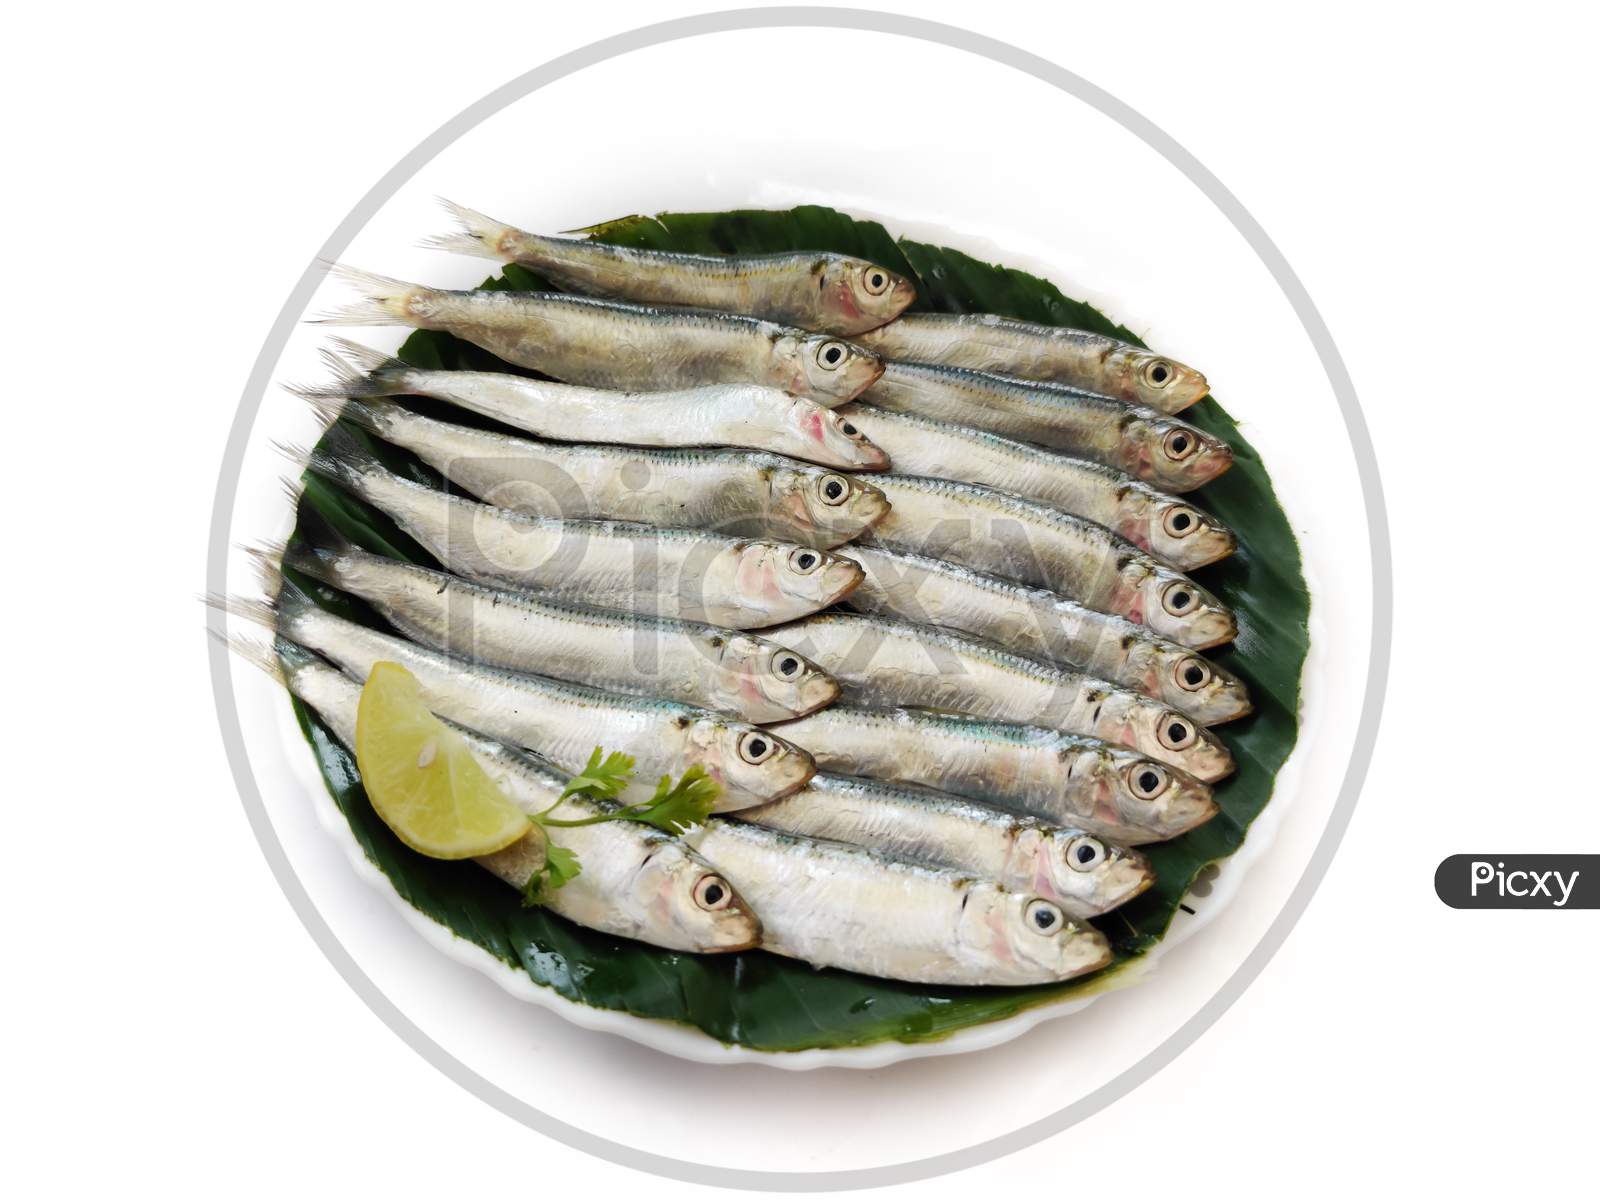 Closeup View Of Fresh Indian Oil Sardine Decorated With Herbs And Vegetables,Selective Focus.White Background.